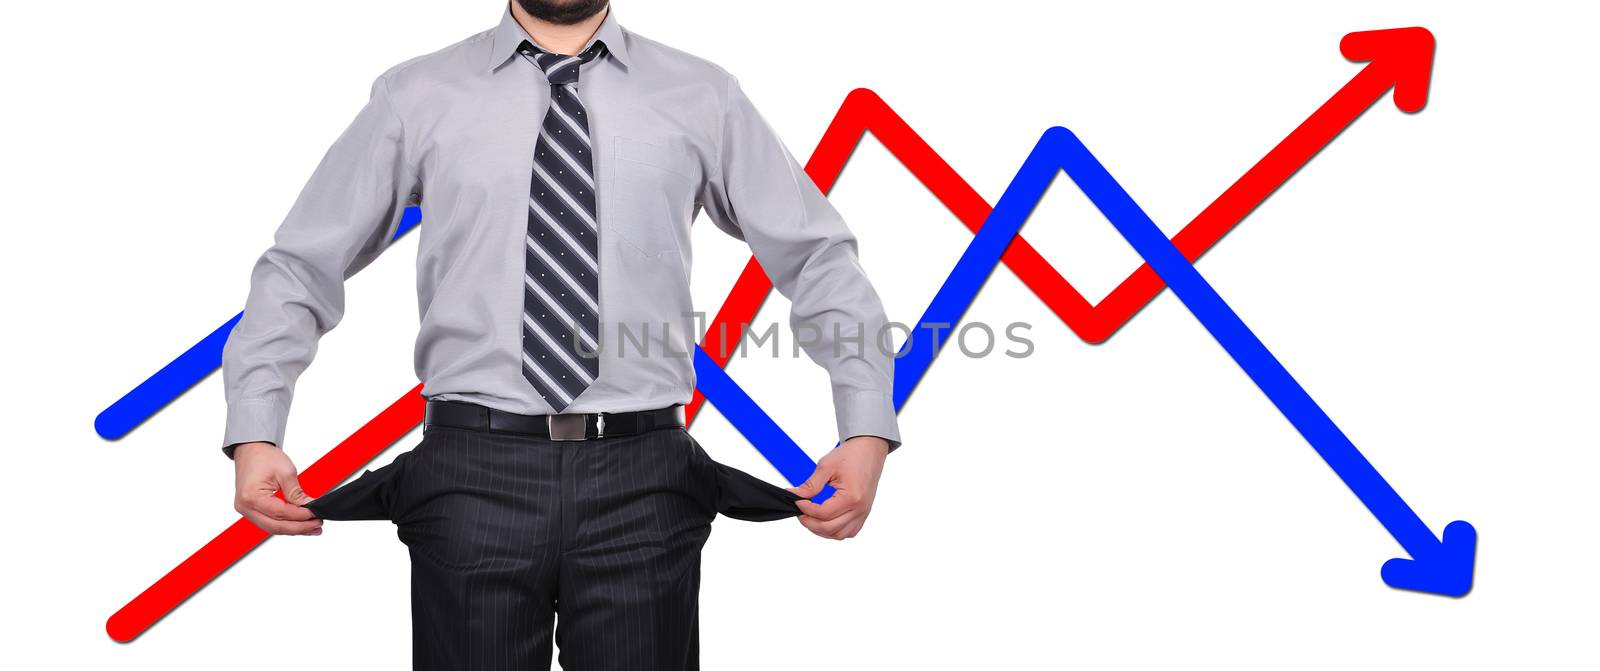 businessman standing with pockets turned inside out, business concept